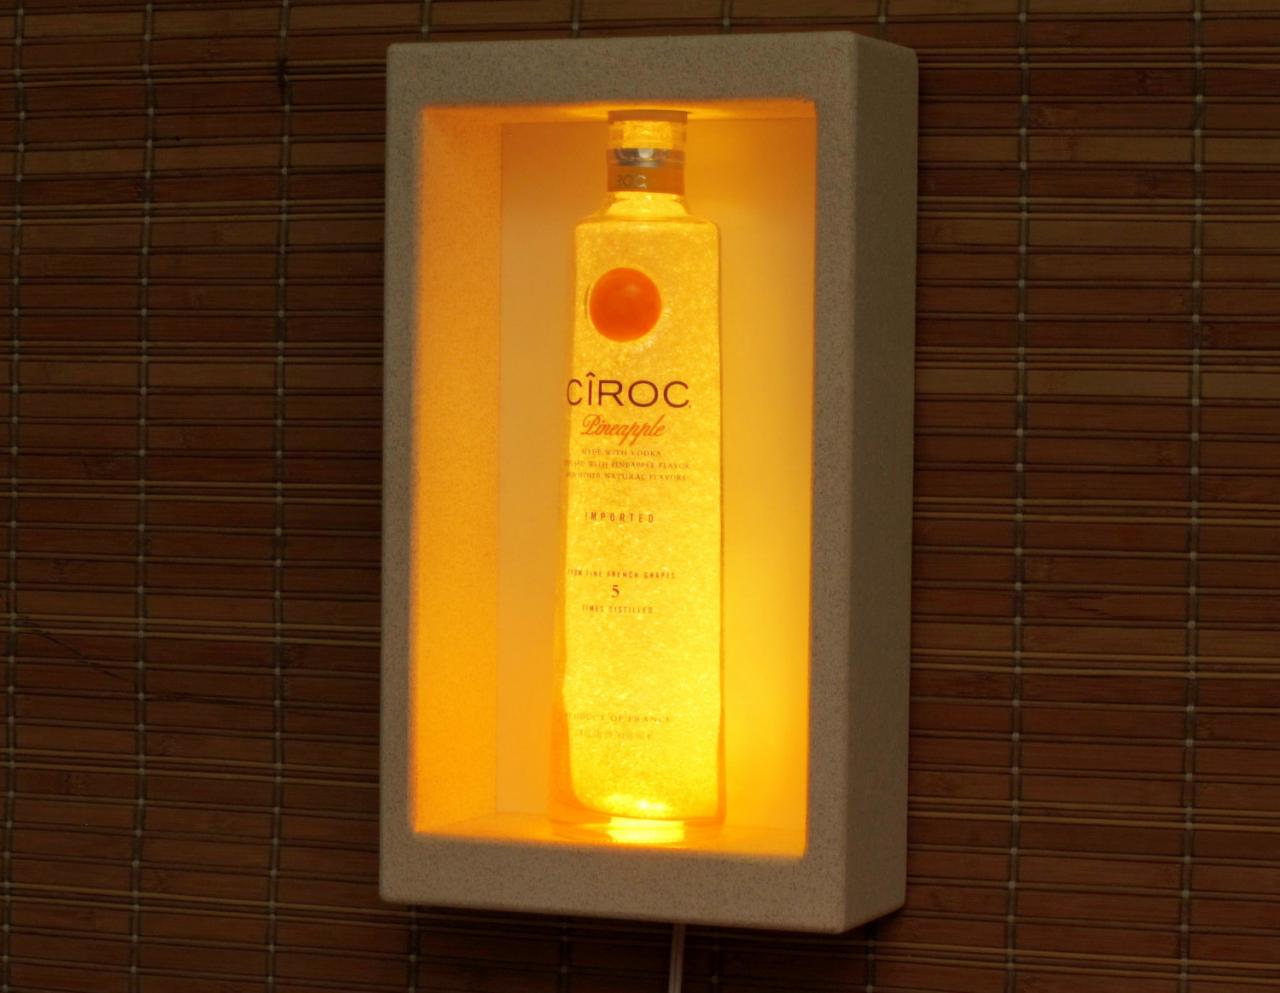 Ciroc Pineapple Vodka Shadowbox Wall Mount Or Tabletop Color Changing Bottle Lamp Bar Light Led Remote Controlled France